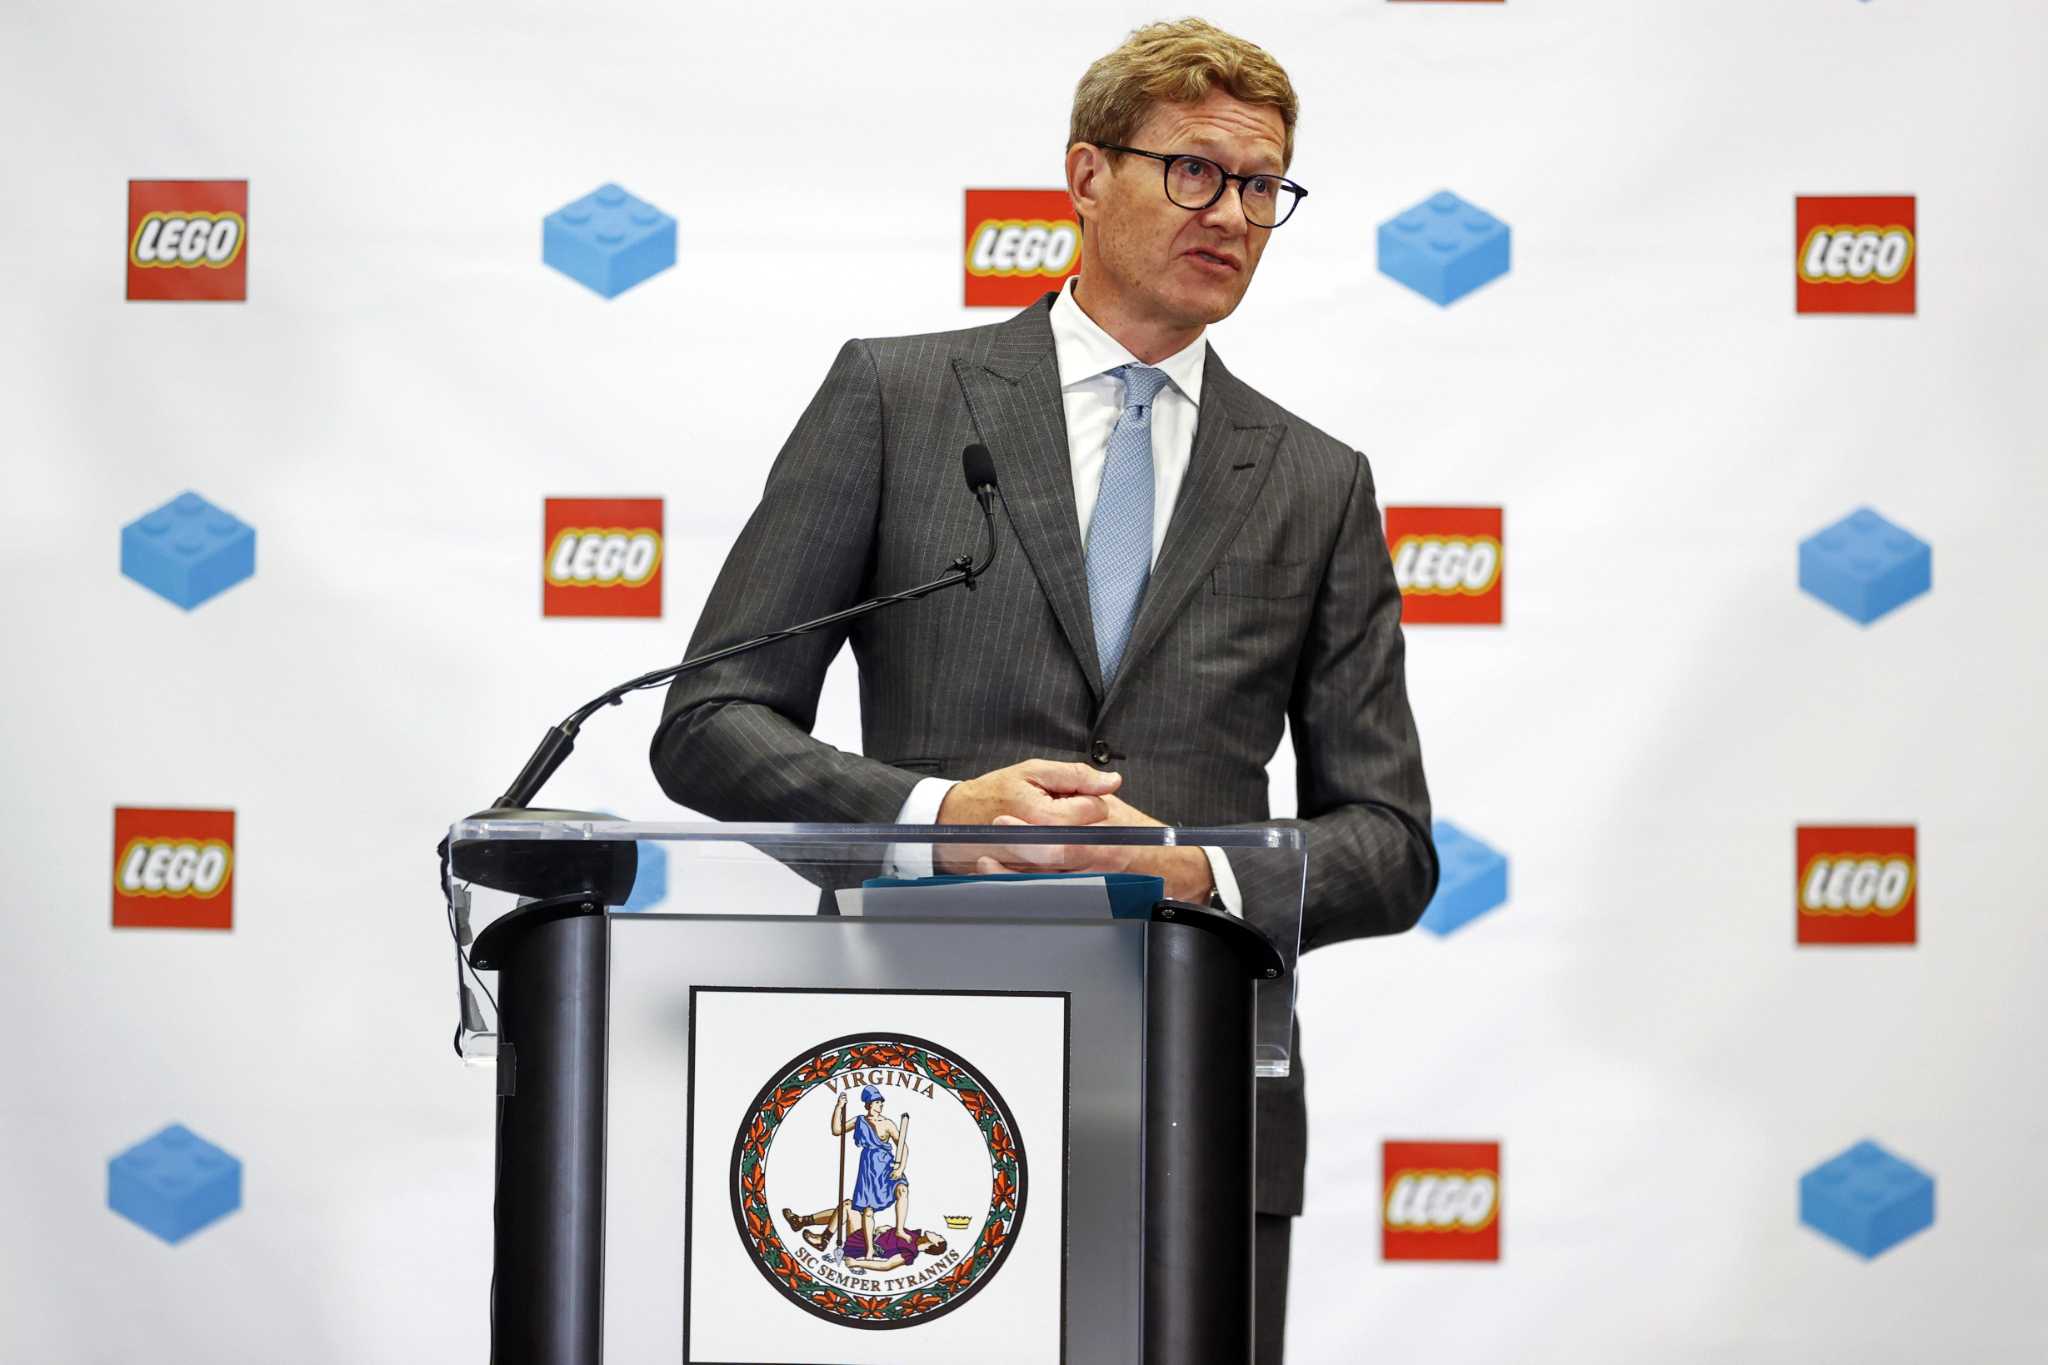 hjort Bliv oppe skrivebord LEGO officials: New factory plans for Virginia won't impact company's  presence in Connecticut